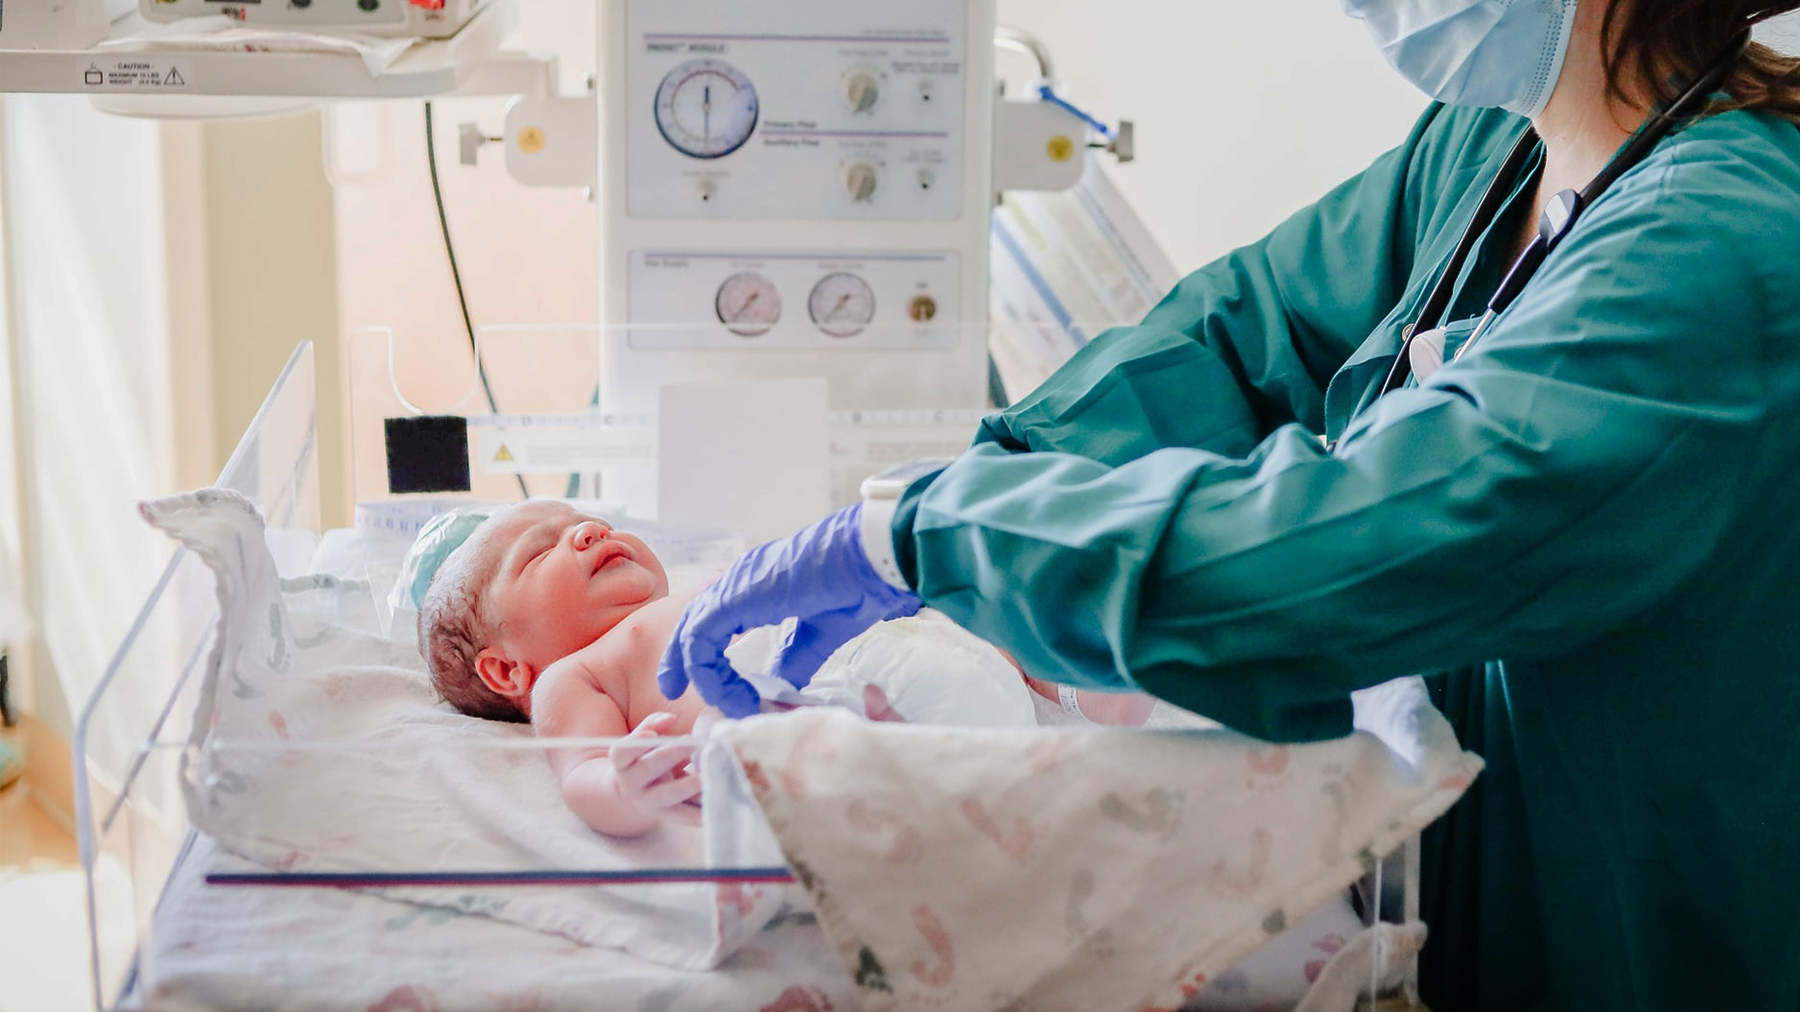 A newborn is cared for by a nurse in a hospital